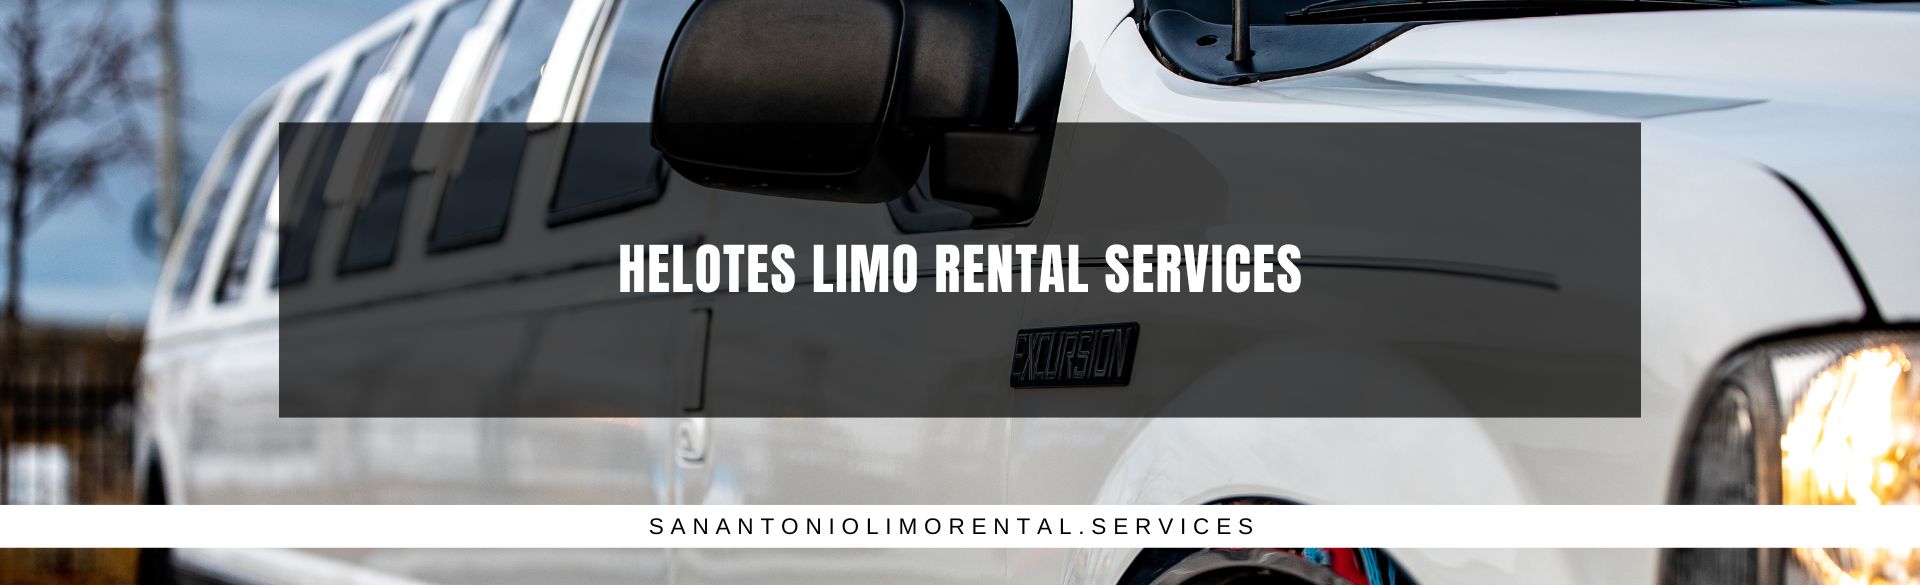 Helotes Limo Rental Services